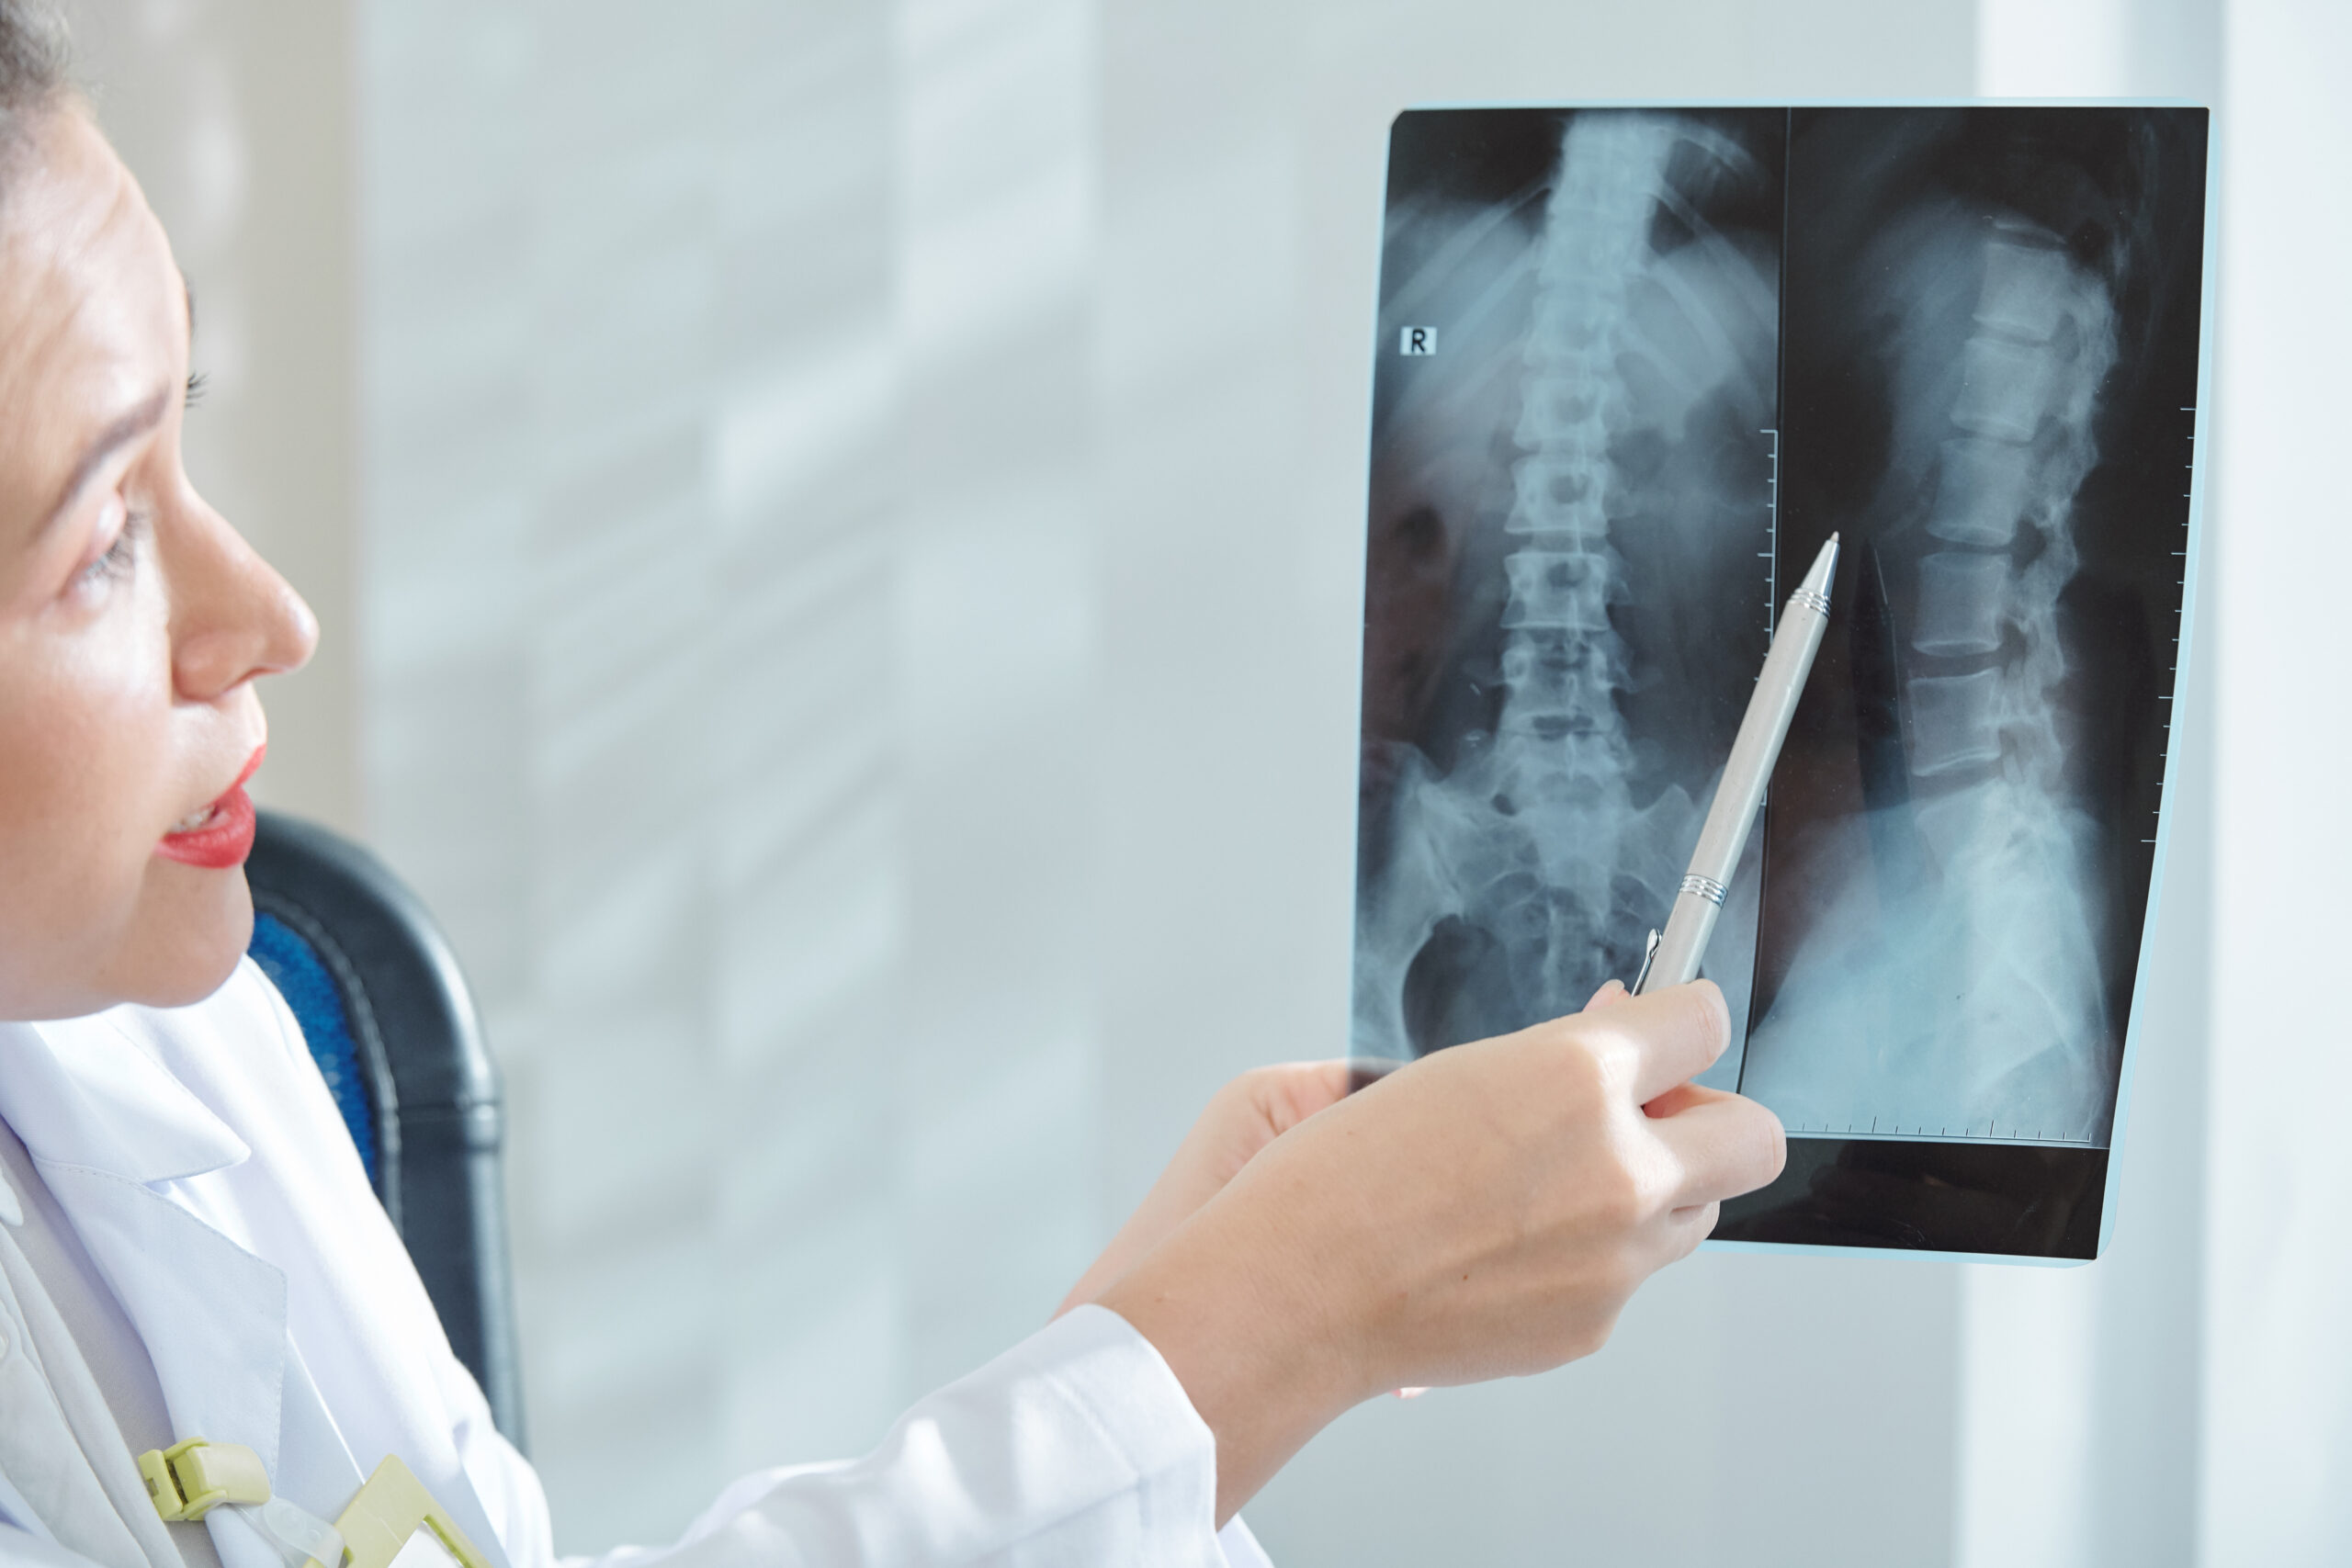 spine surgery in india